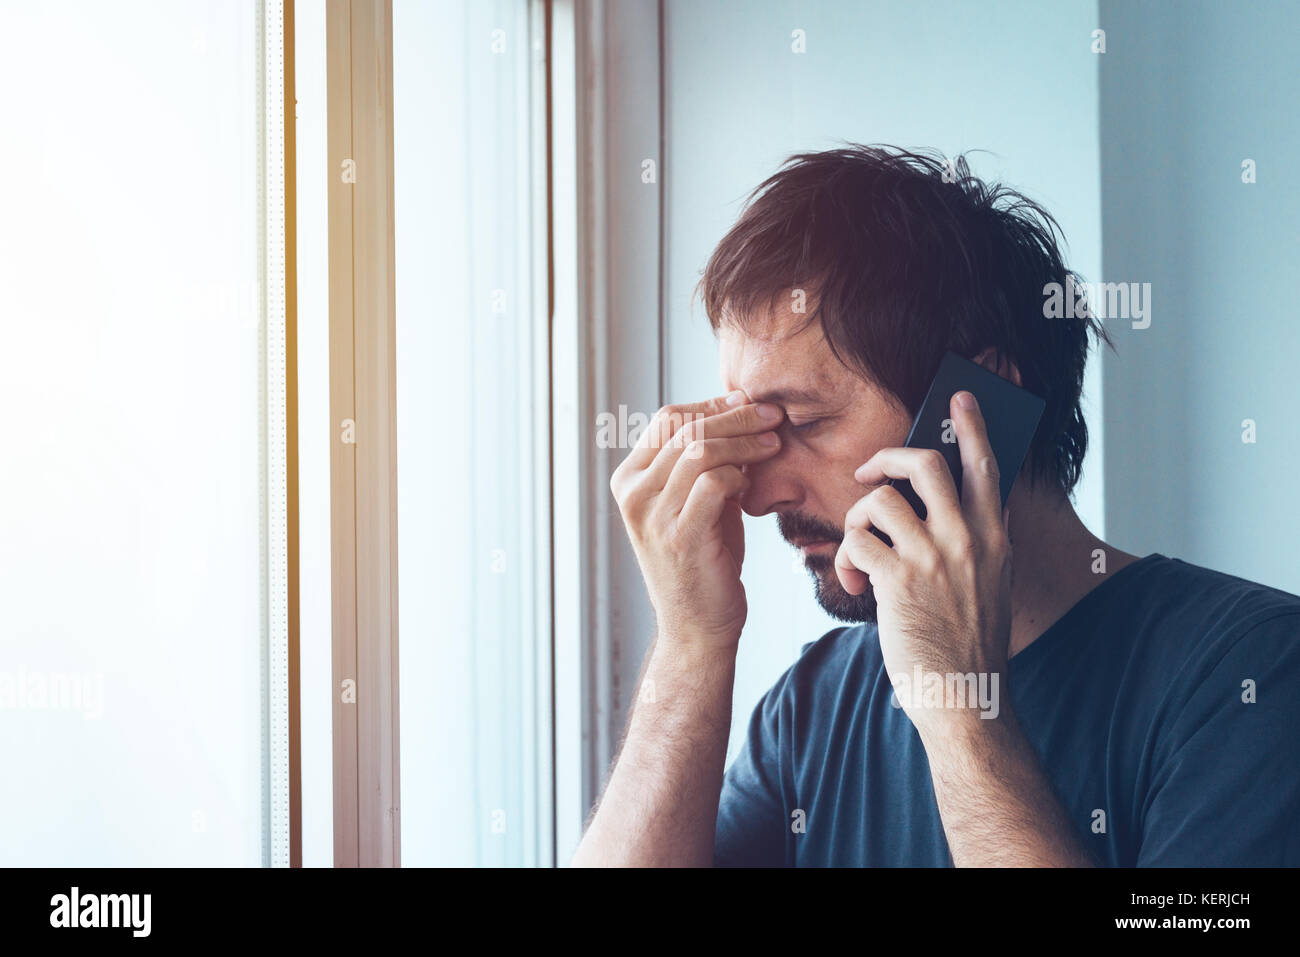 Unpleasant phone call, worried anxious man talking with someone on mobile phone Stock Photo